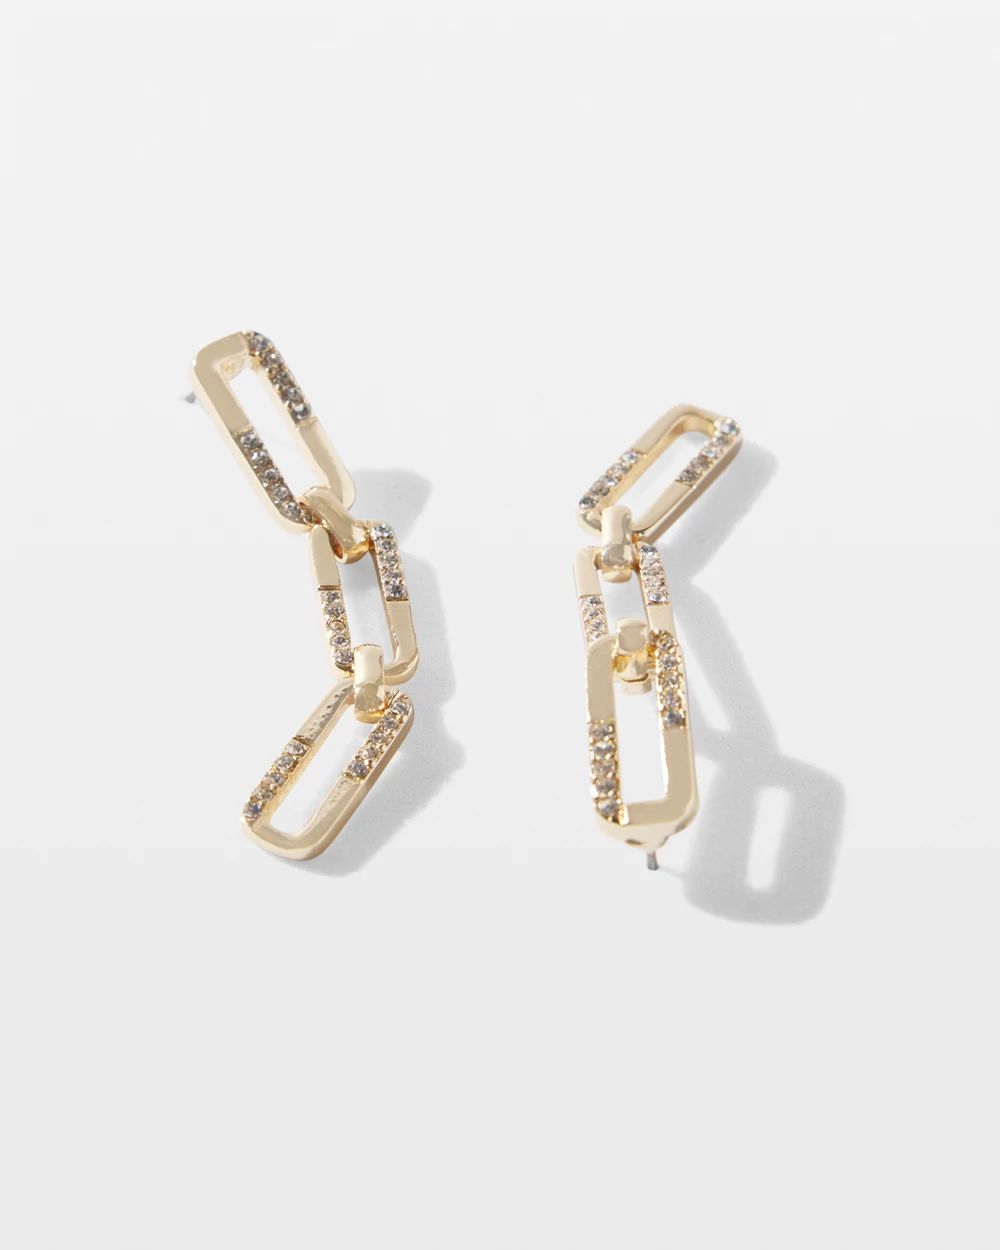 Gold Pave Chain Link Drop Earrings click to view larger image.